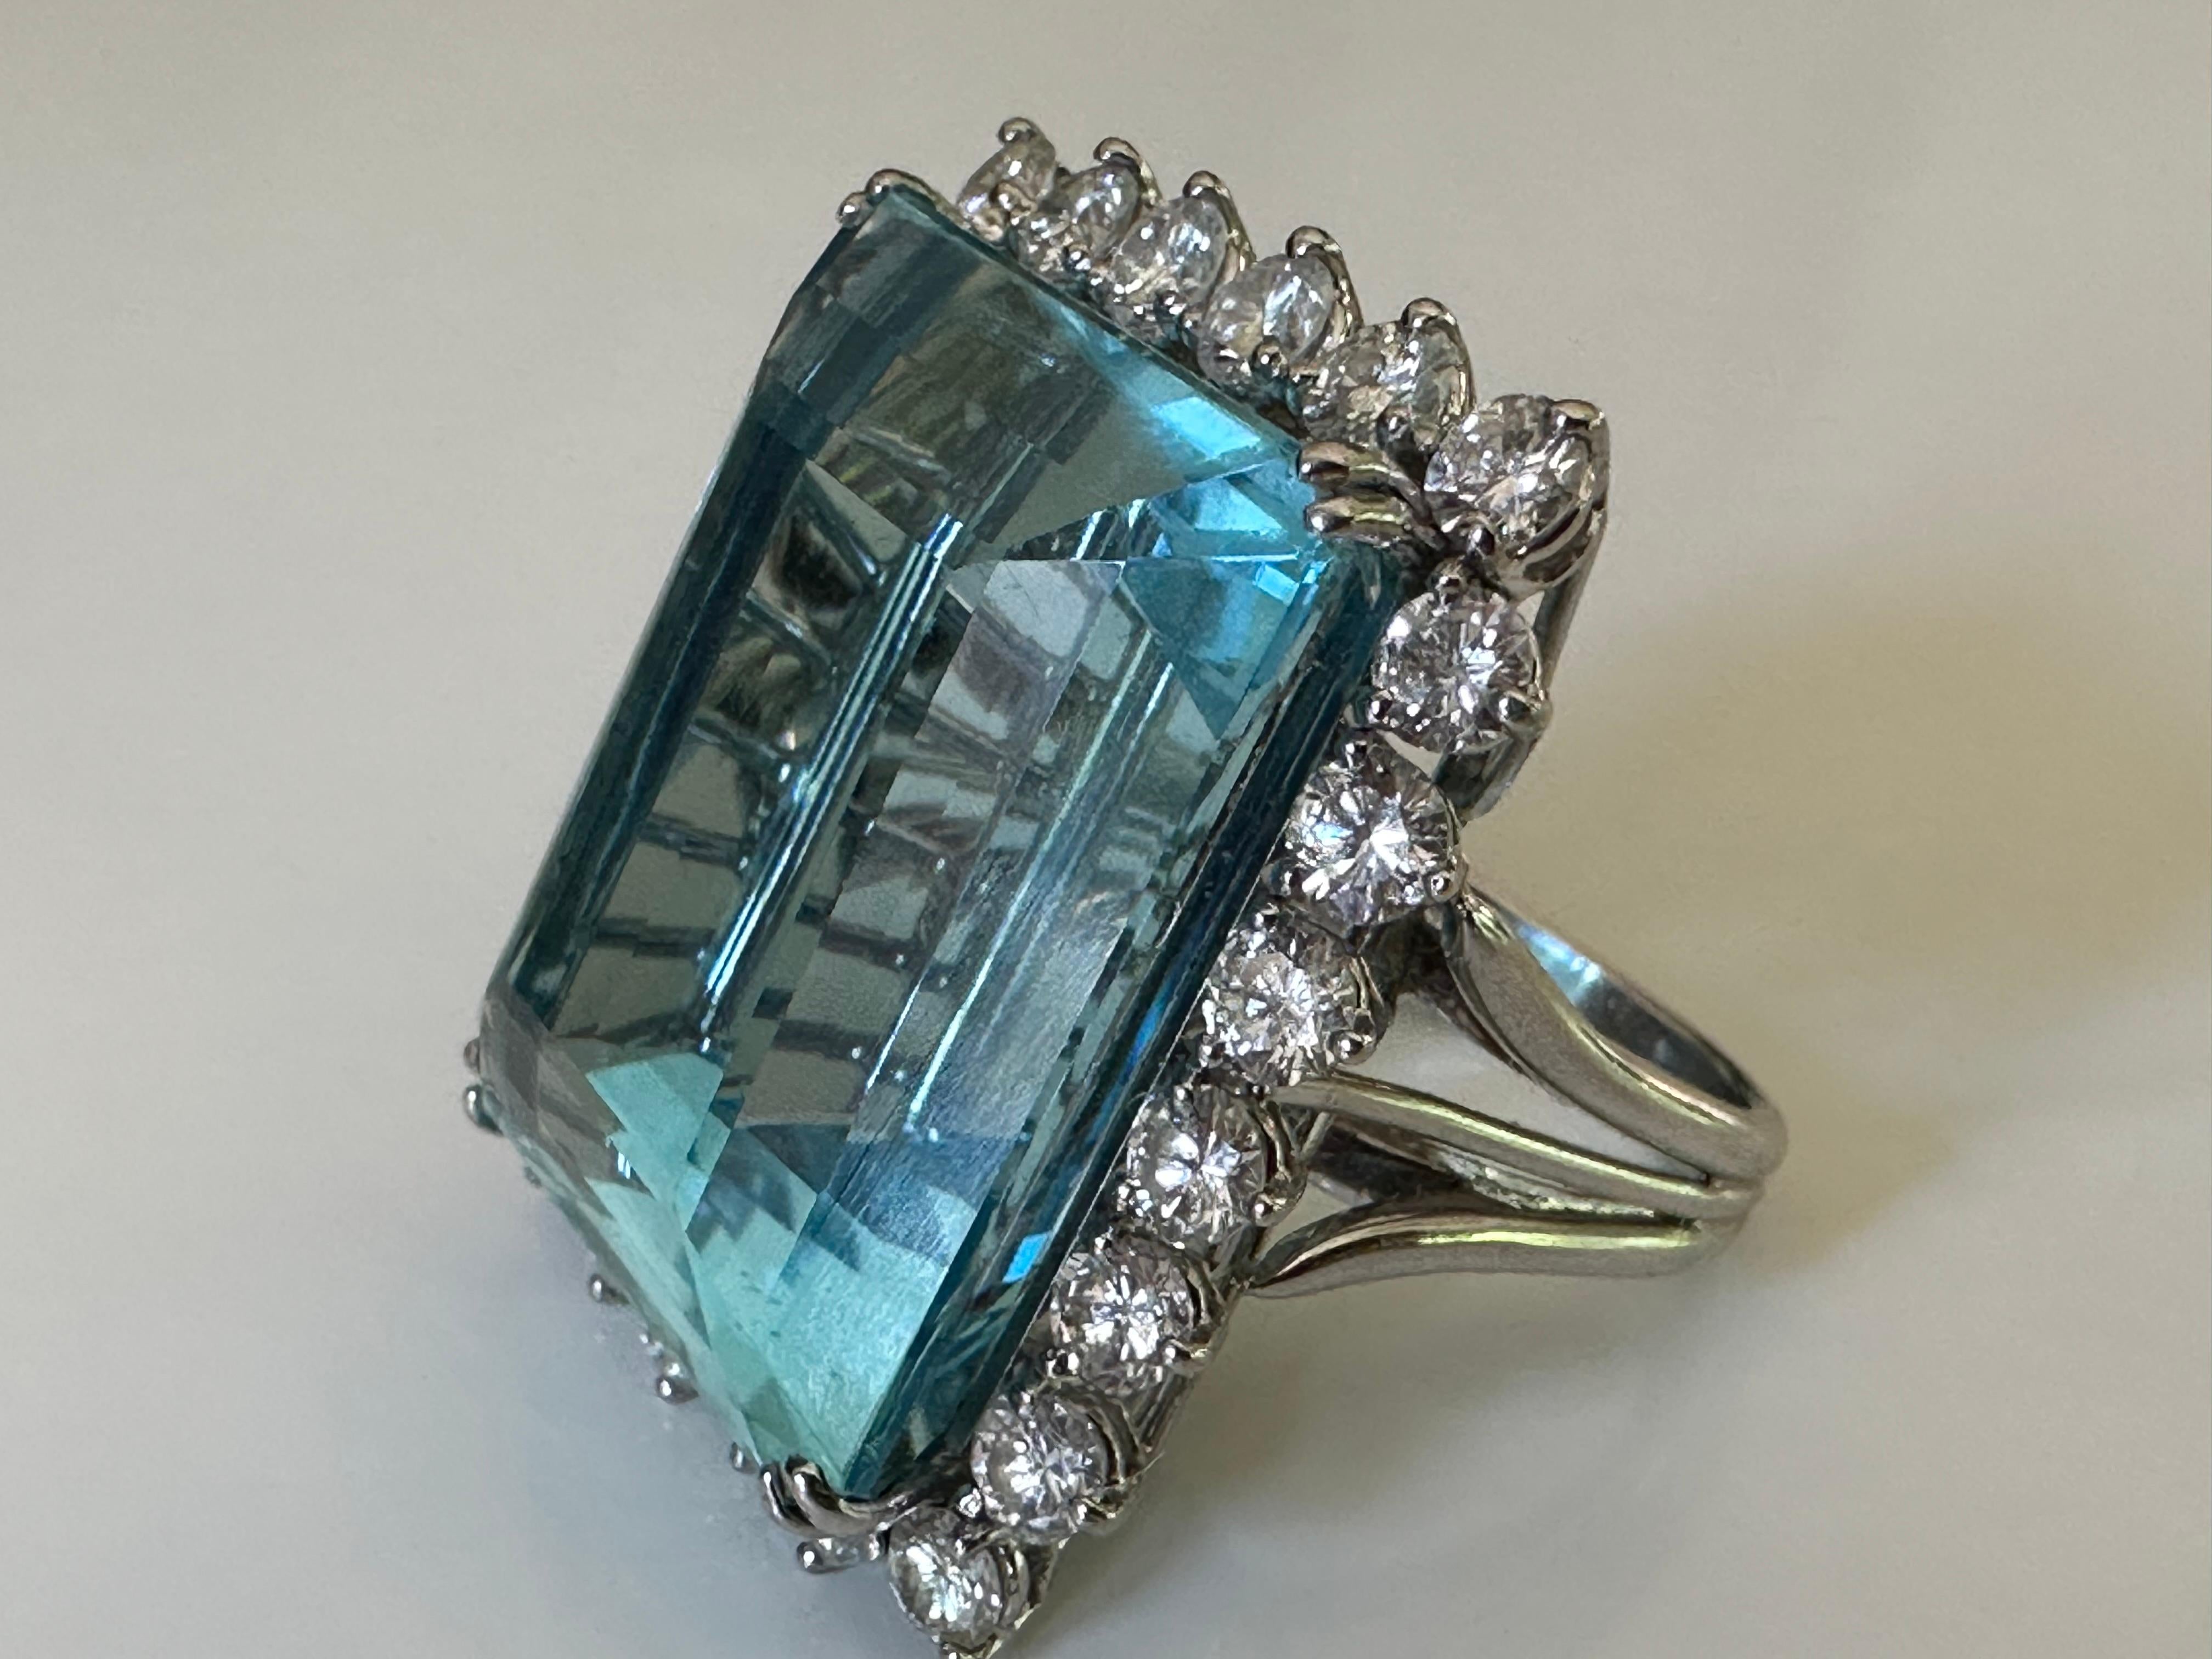 With its stunning hue, reminiscent of the clear blue ocean, this monumental 49.20-carat emerald-cut aquamarine centers this magnificent cocktail ring. Designated as 